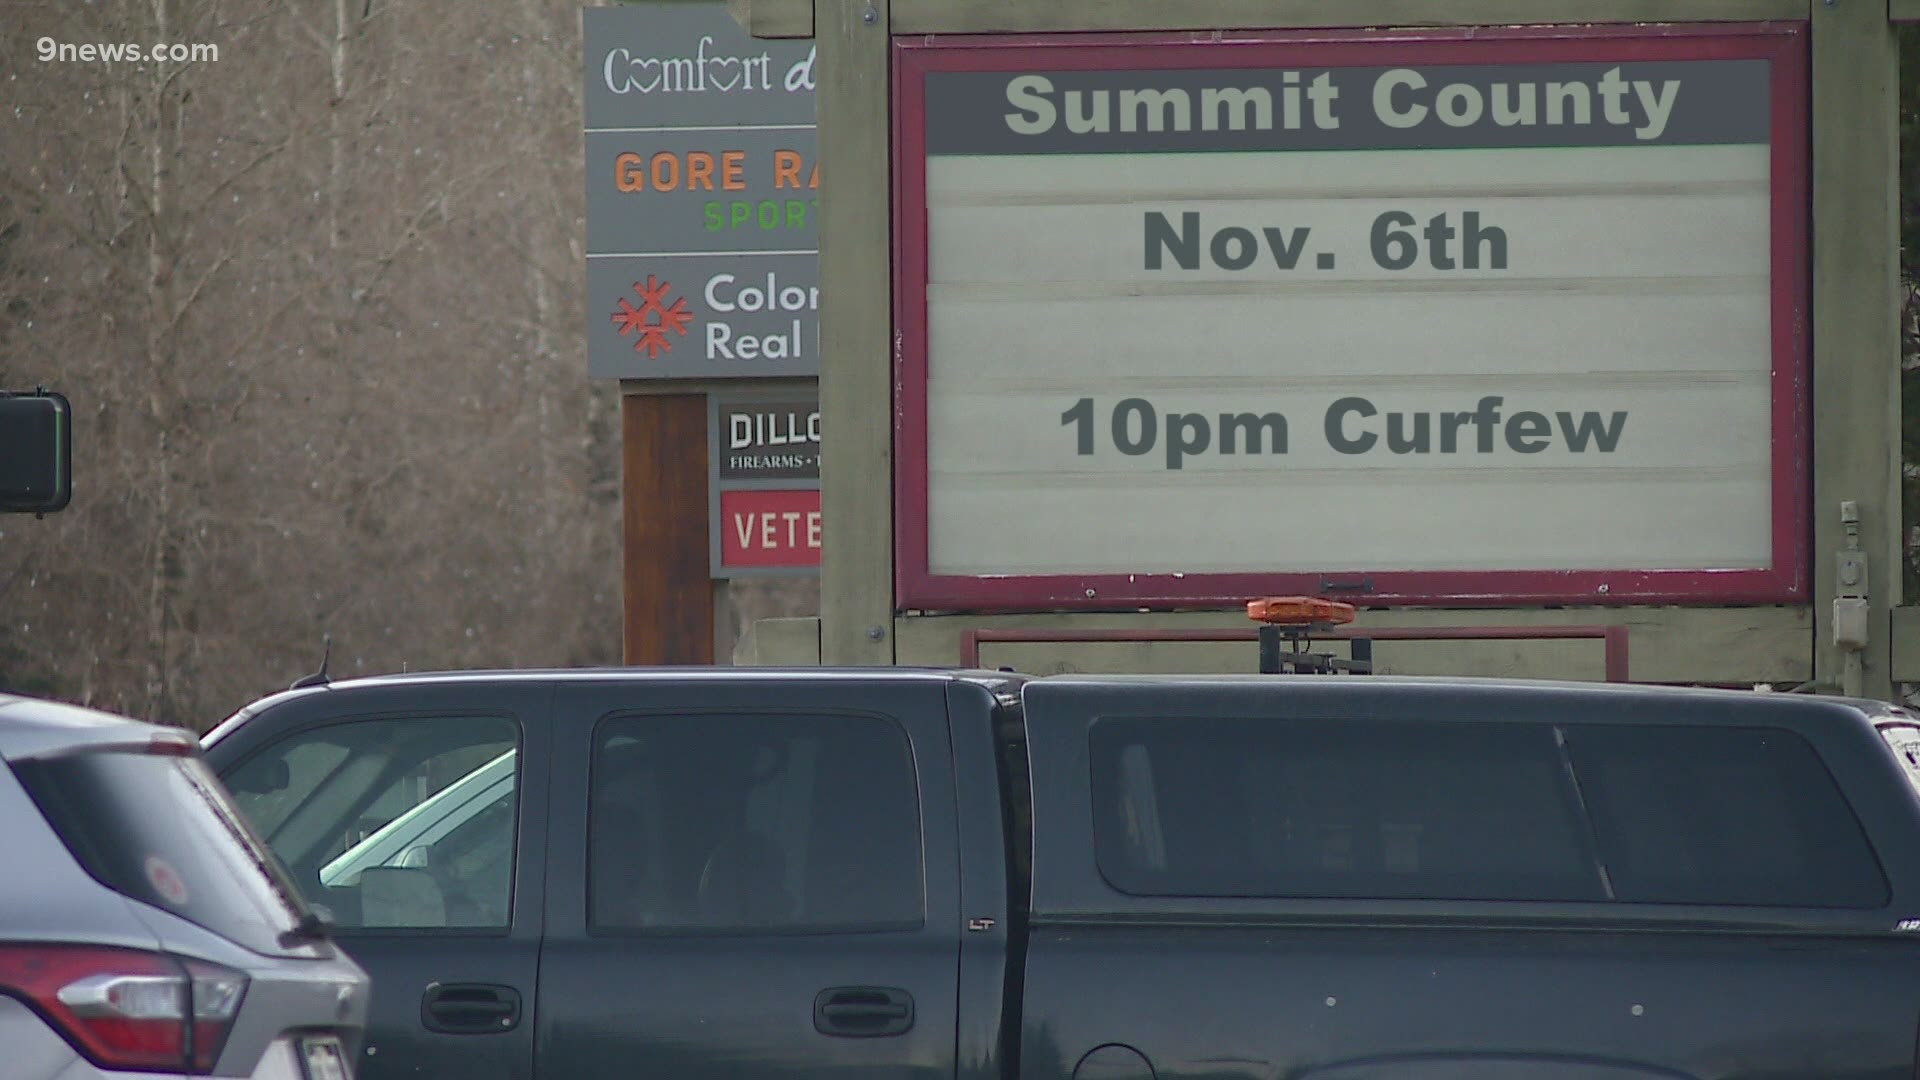 Beginning at 5 p.m. Friday, Nov. 6, Summit County will move to Safer-at-Home Level Orange, formerly called Level 3.